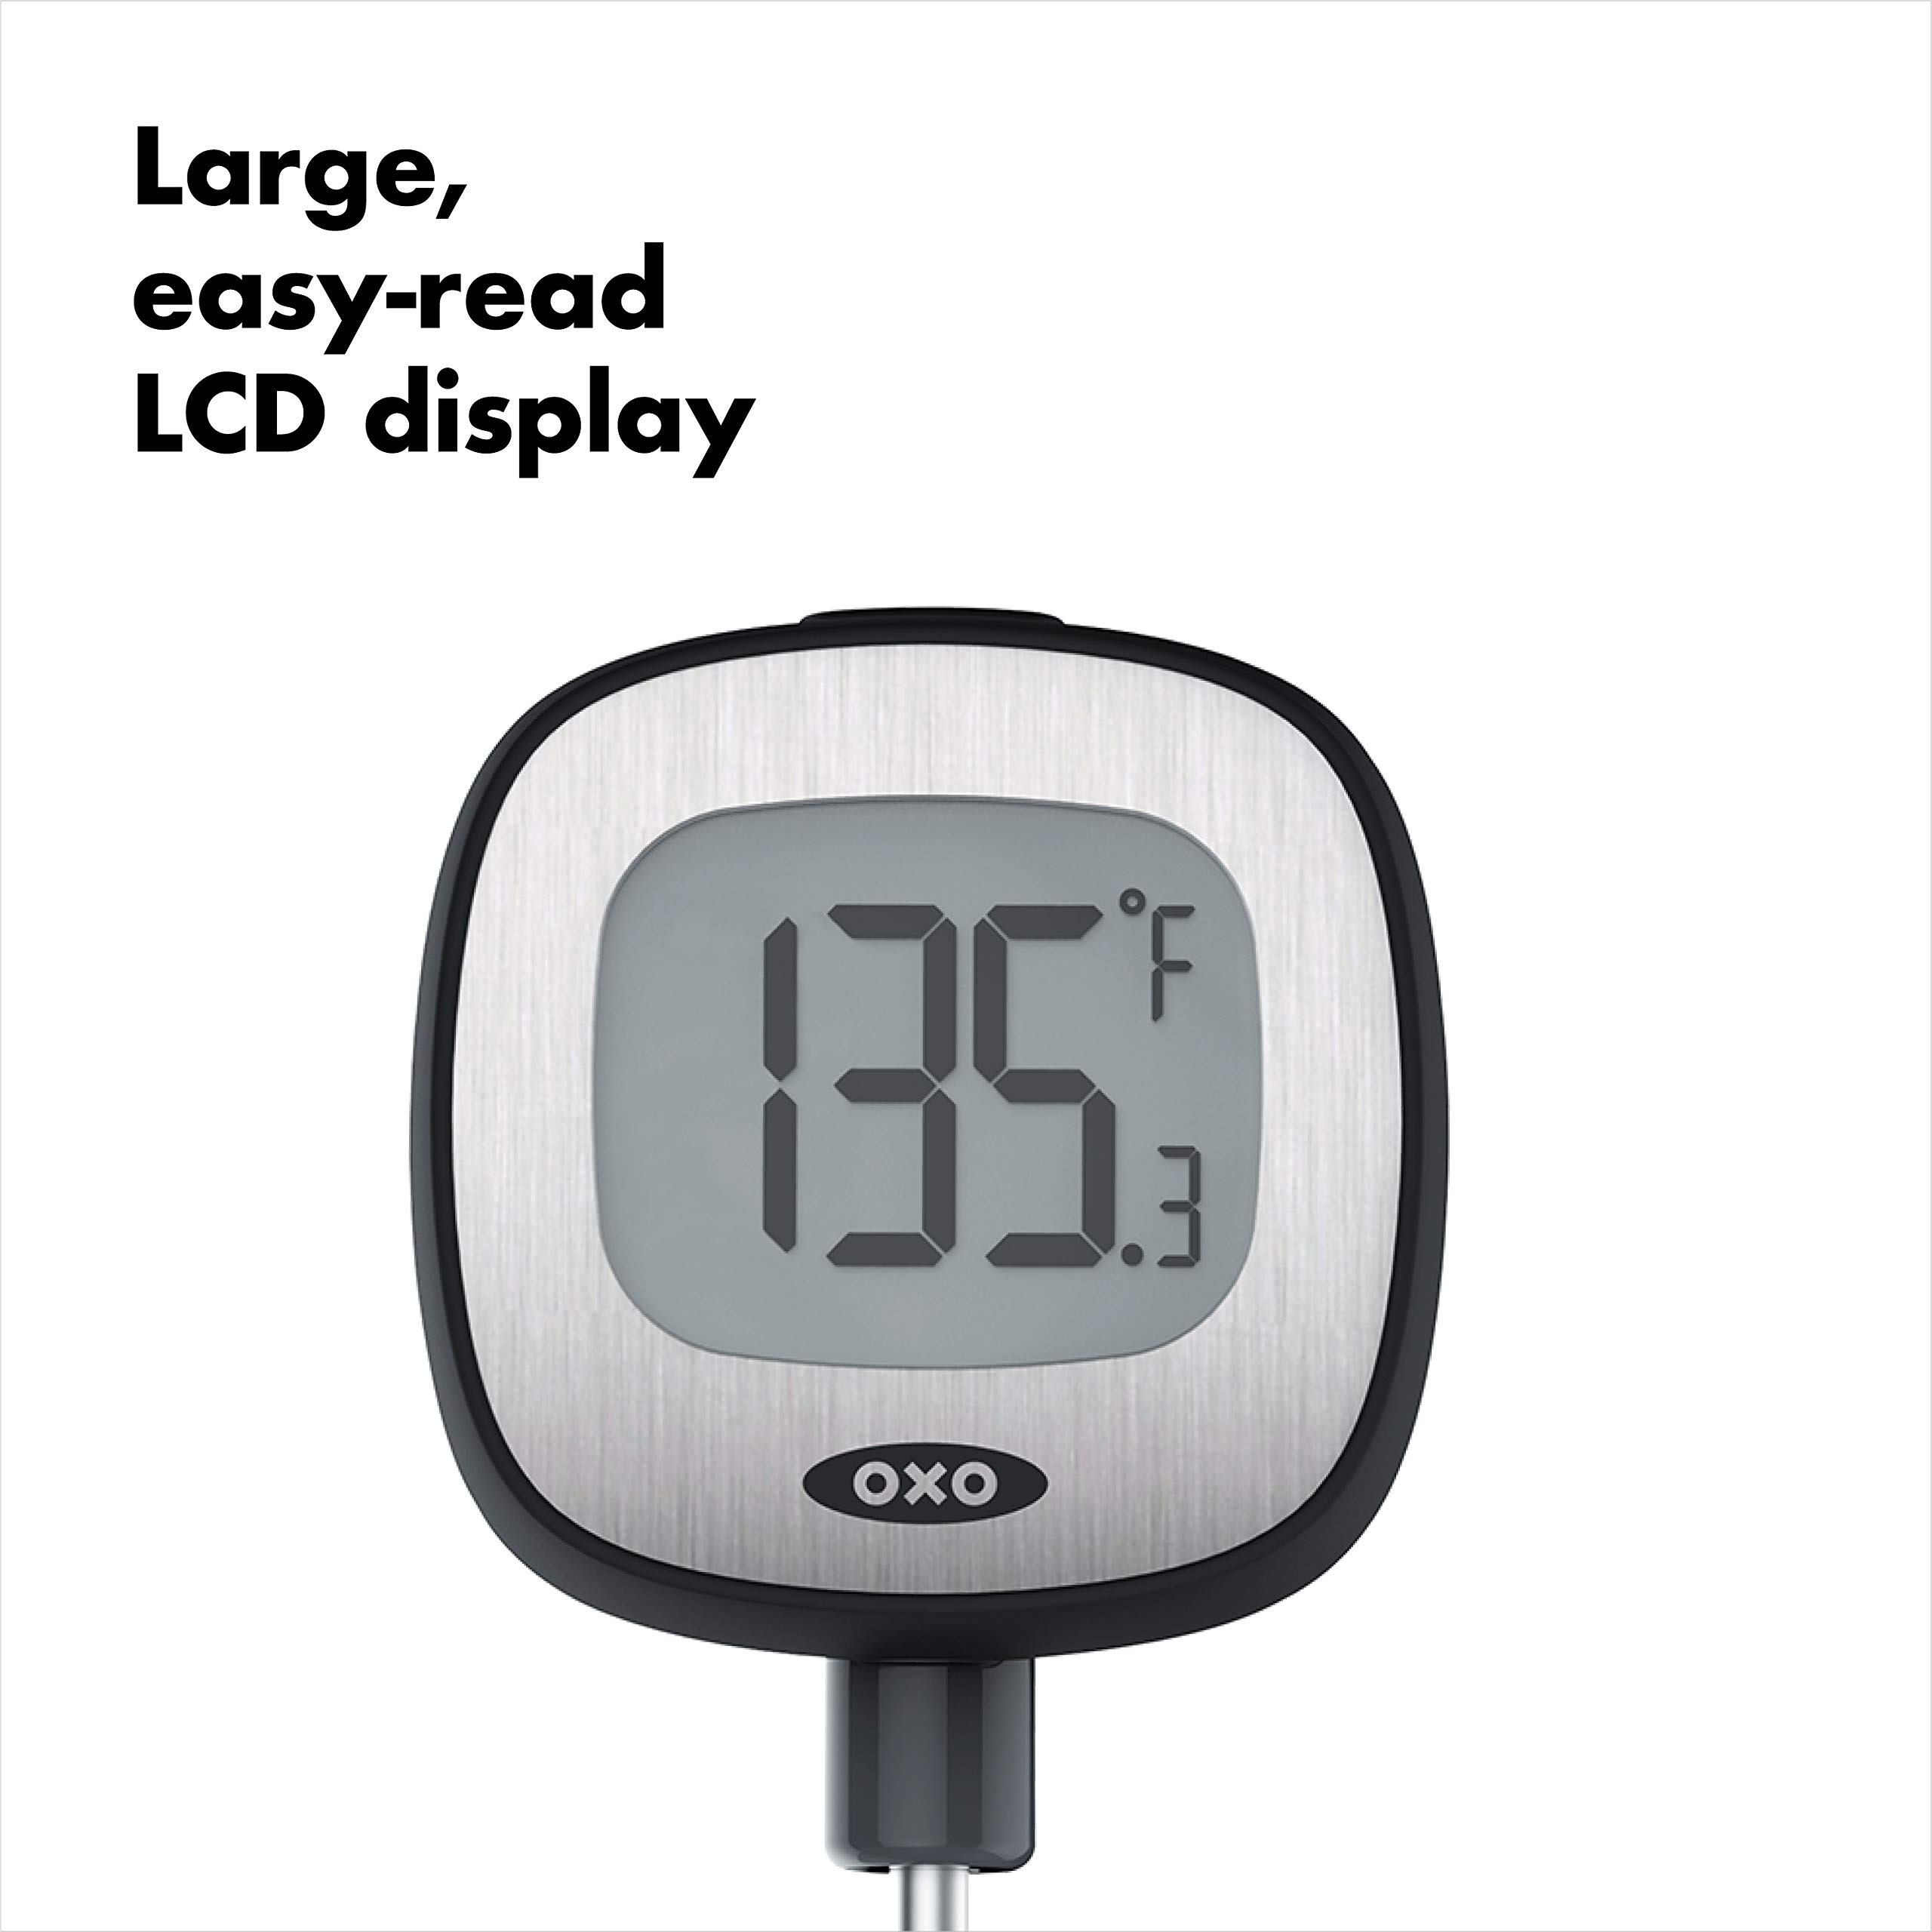 OXO Good Grips Chef's Precision Digital Instant Read Thermometer, Black